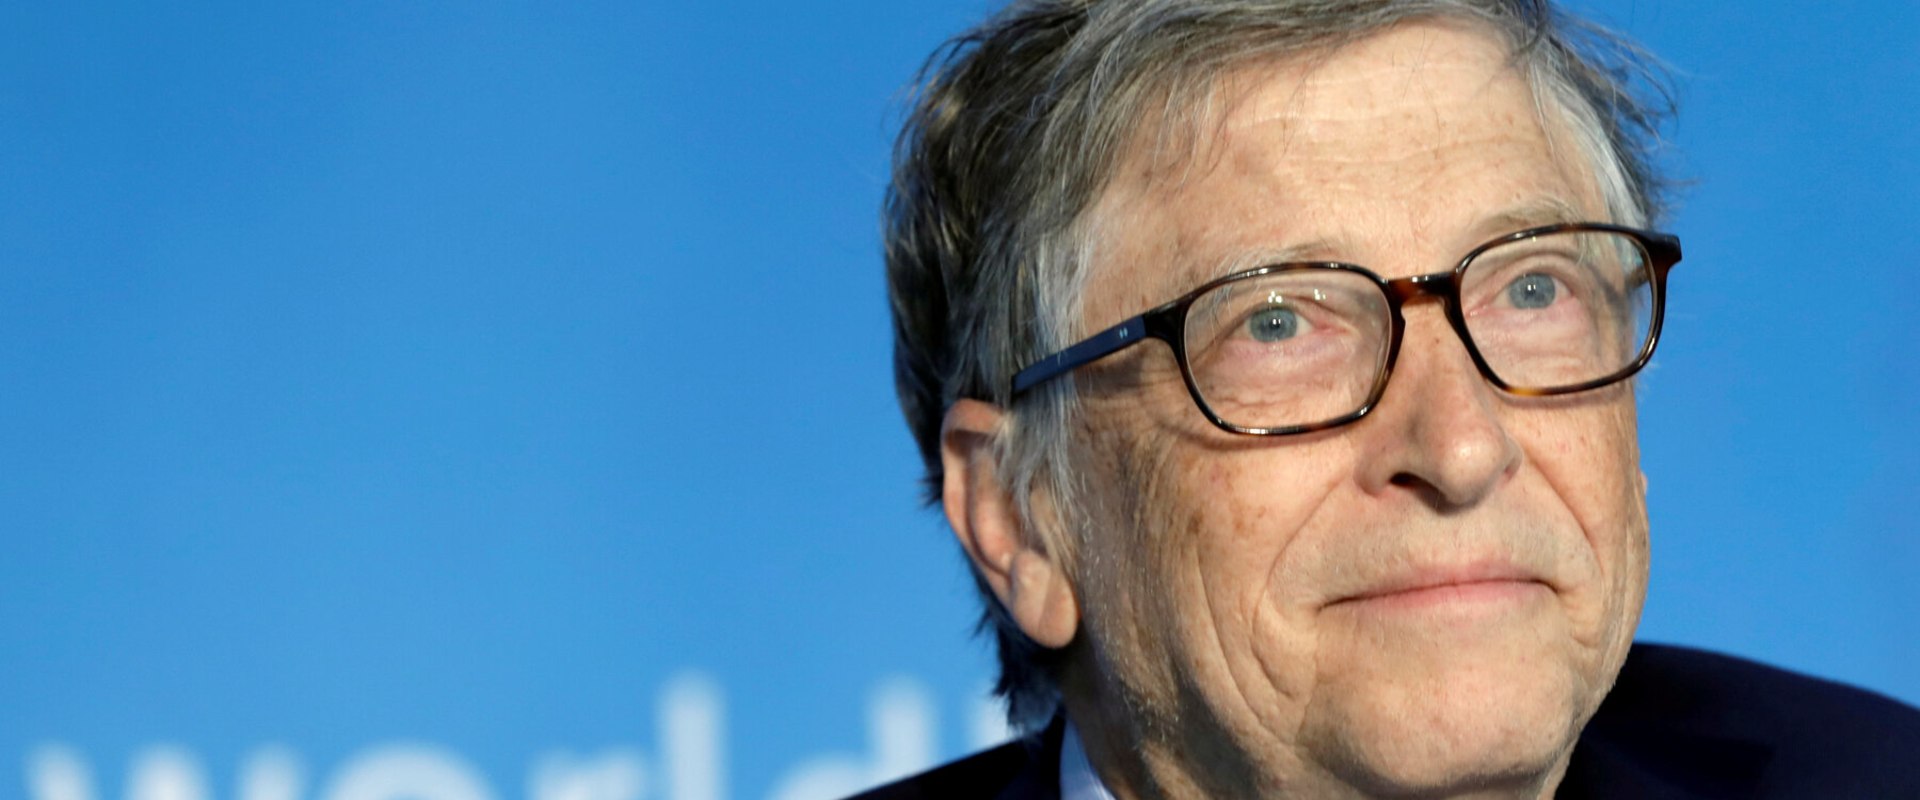 What Does Bill Gates Think About Bitcoin?